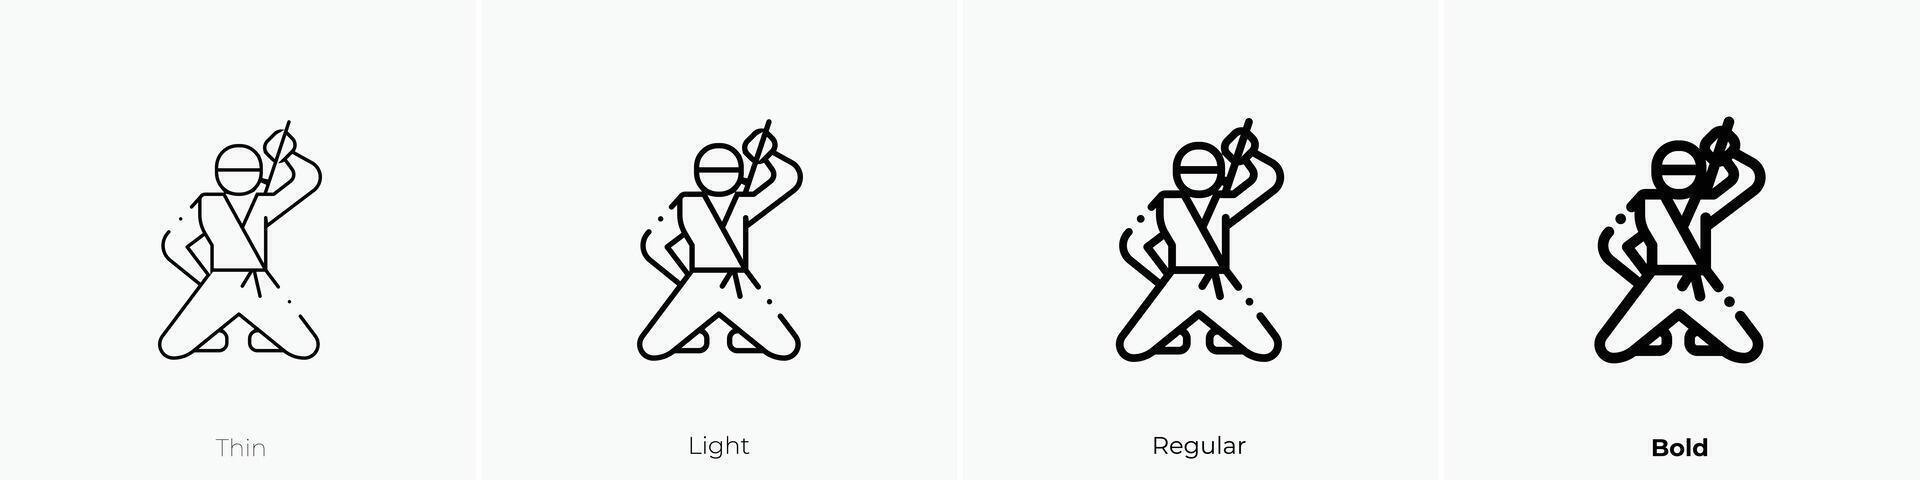 ninja icon. Thin, Light, Regular And Bold style design isolated on white background vector